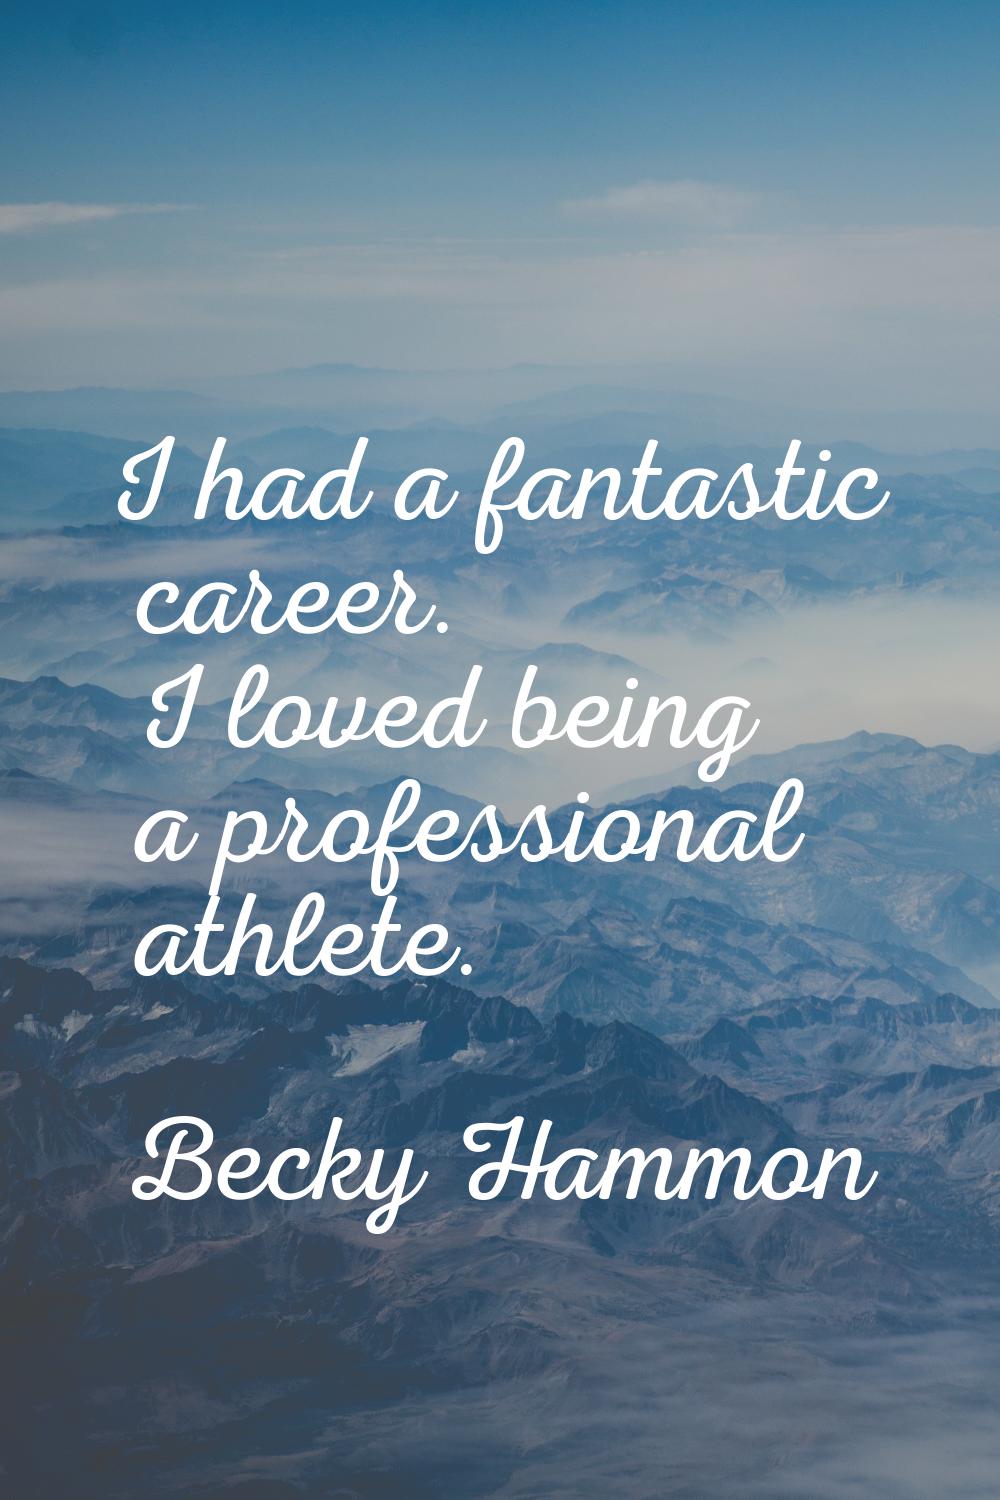 I had a fantastic career. I loved being a professional athlete.